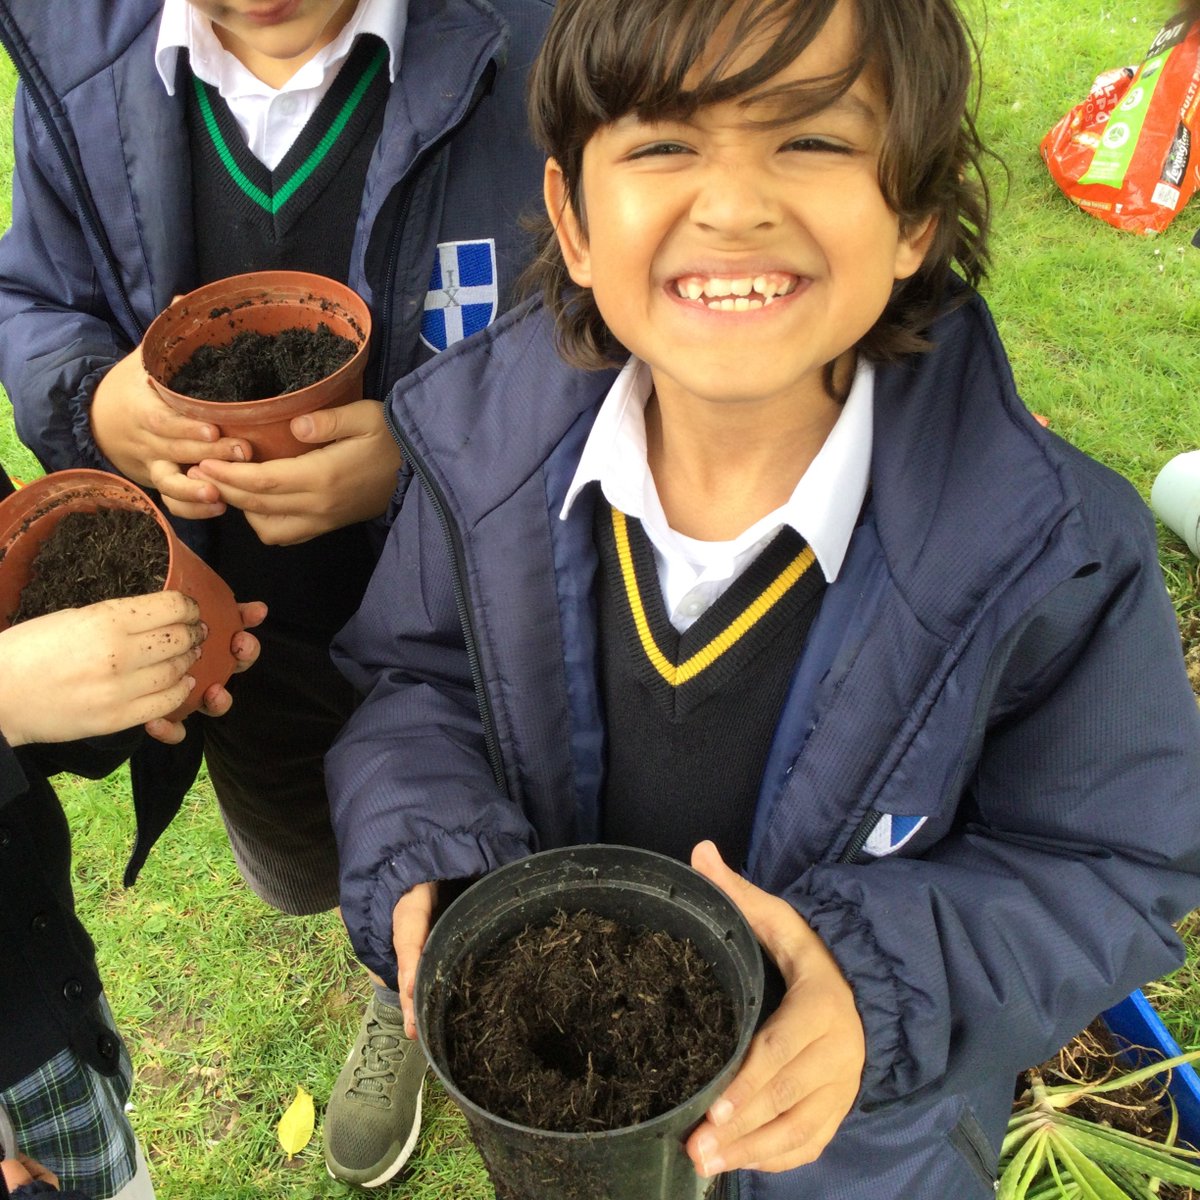 Year 3 pupils have been actively preparing for their yearly plant stall, set to take place during our upcoming Summer Fête. The entire Junior King’s community looks forward to this delightful event, where we unite for fun and fundraising in support of charity. #fête #community